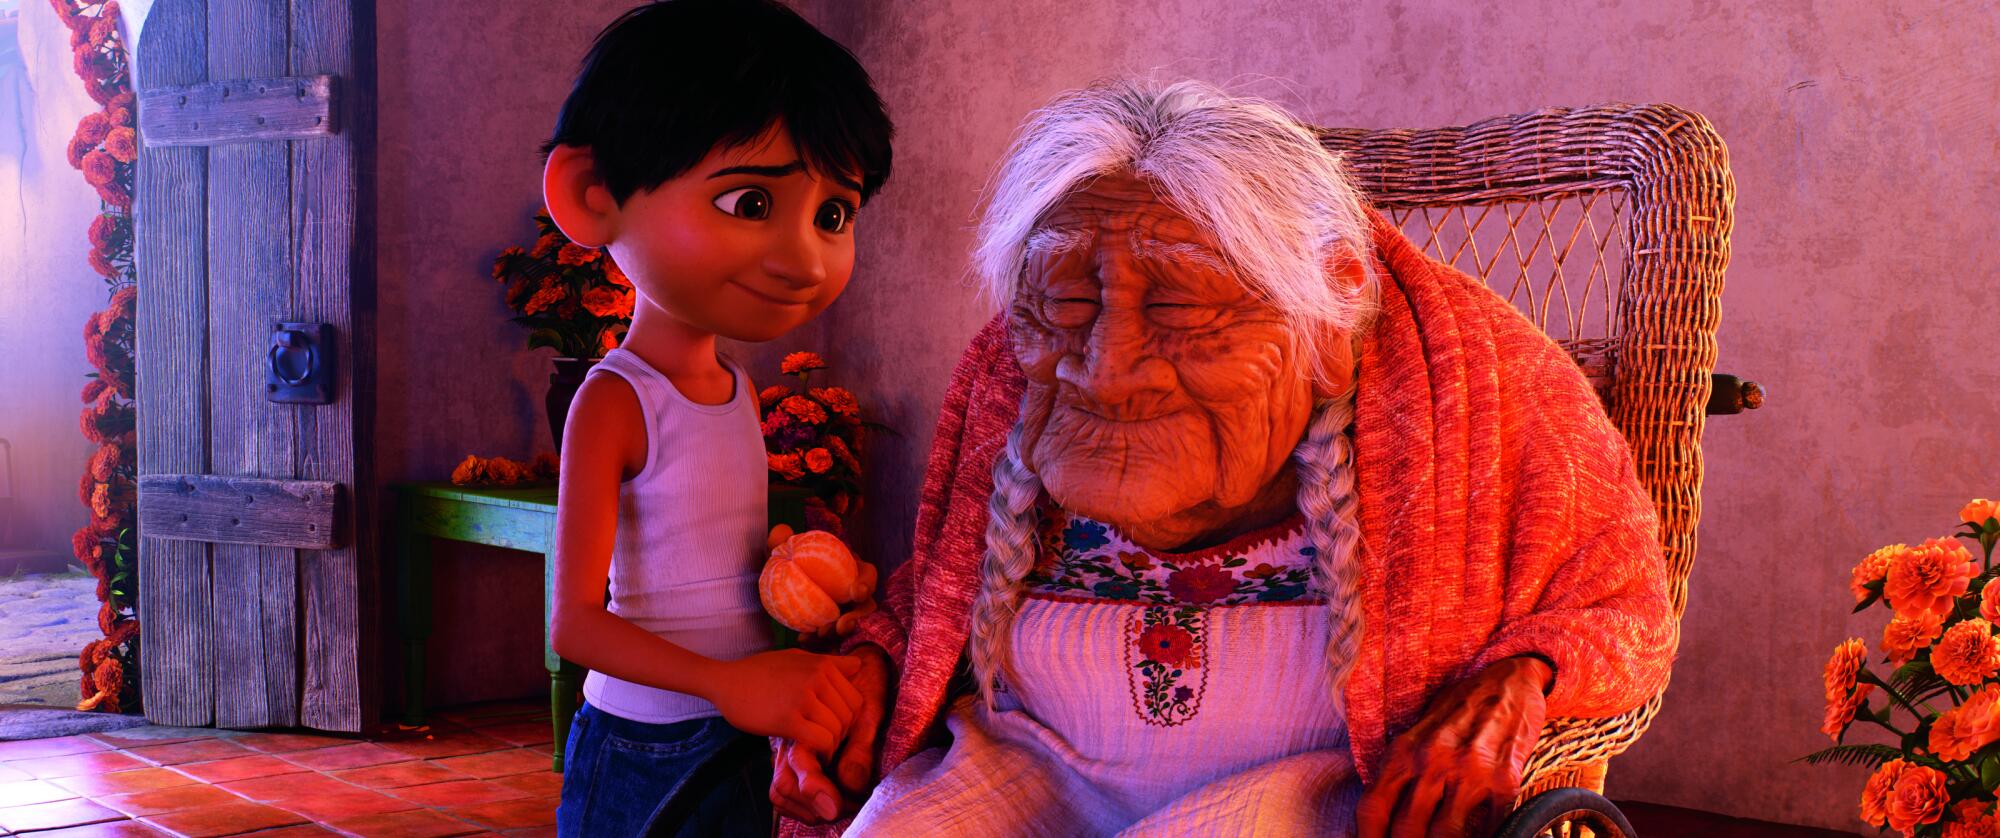 A still from the film "Coco"